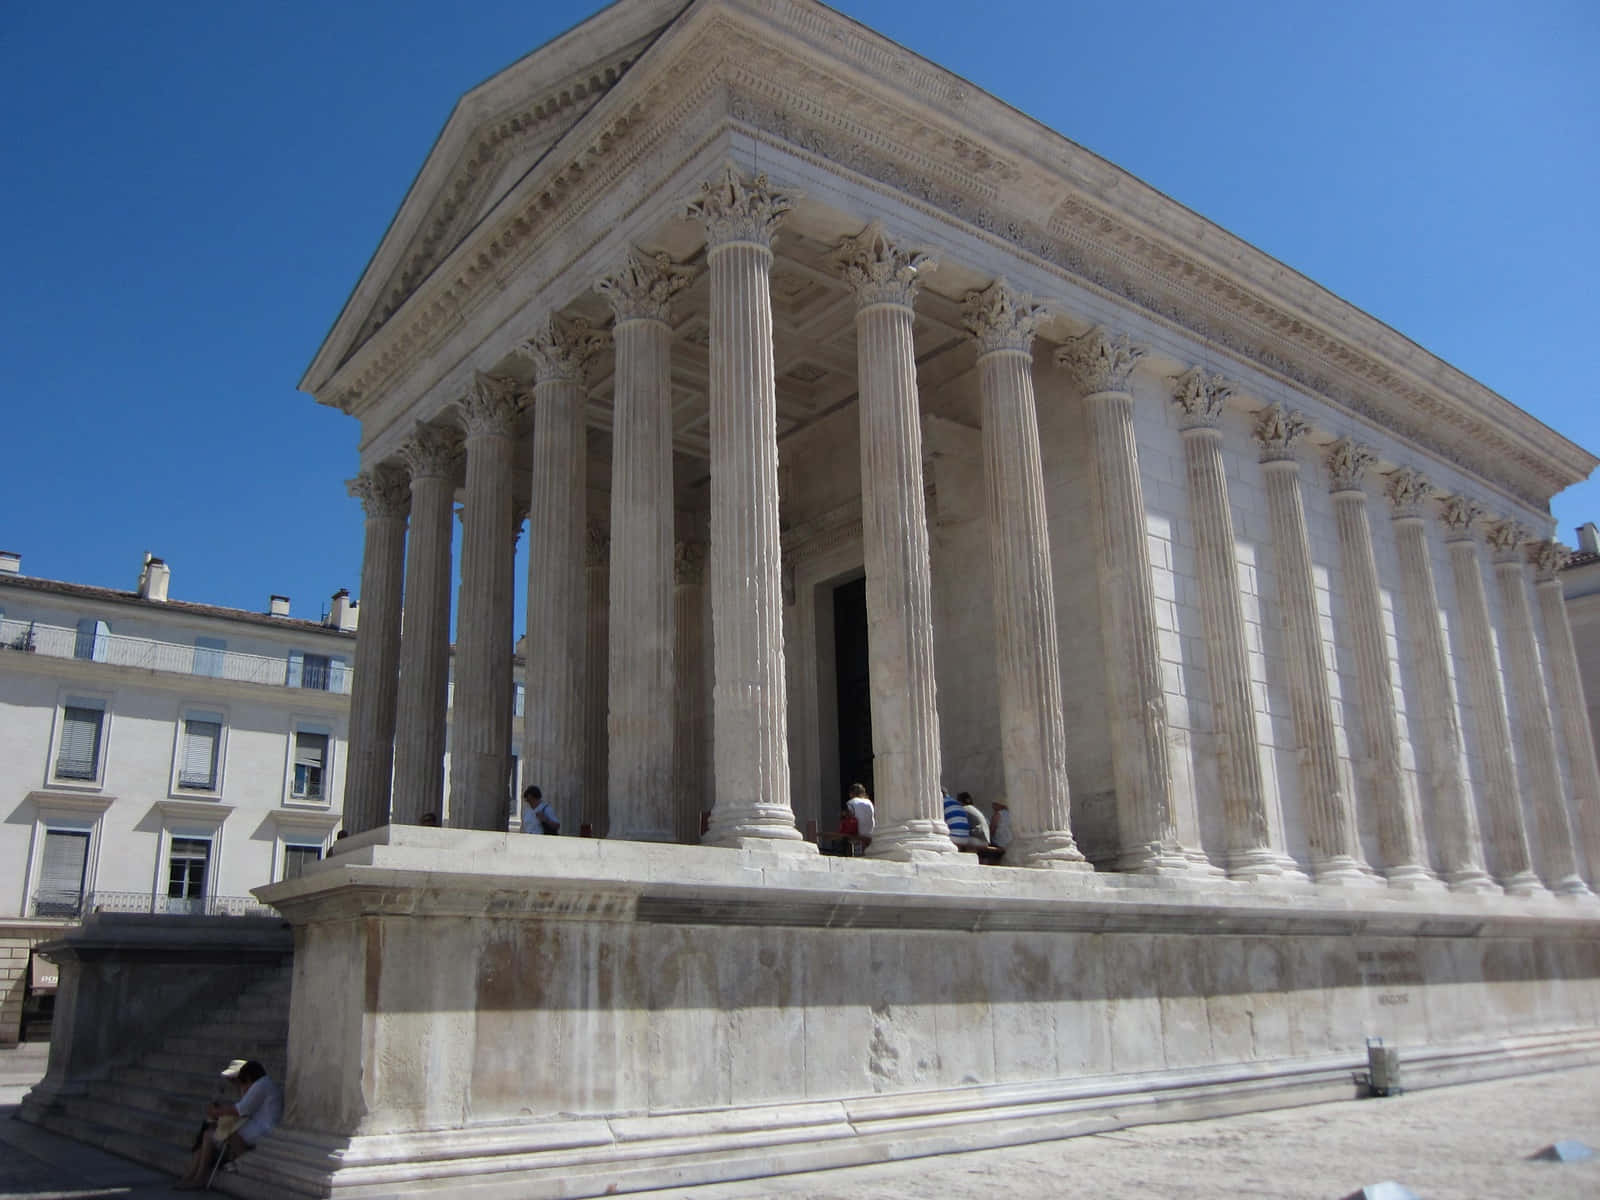 Maison Carrée From An Angle Wallpaper